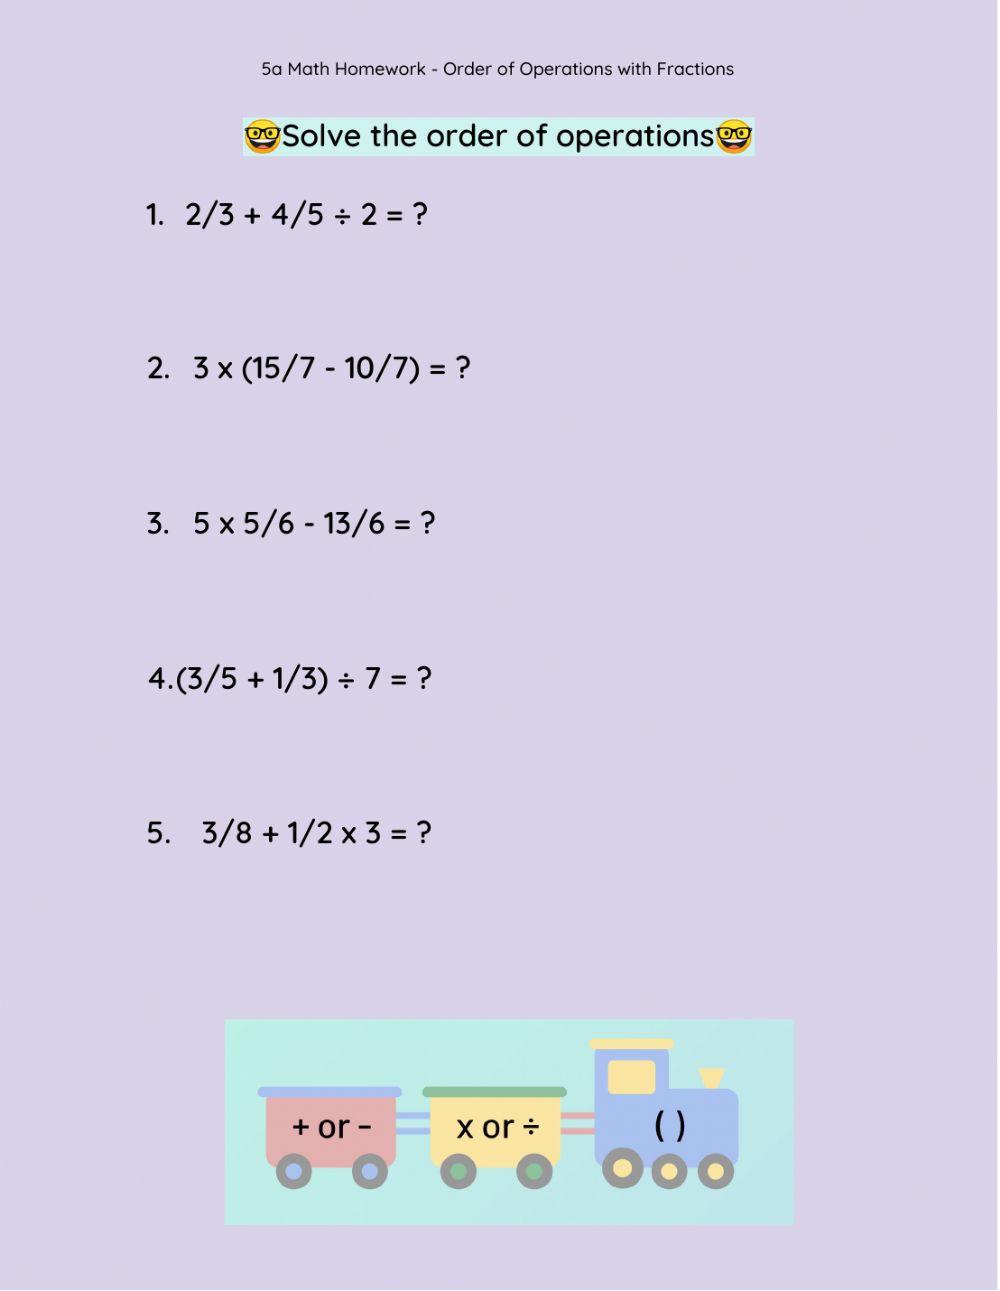 5a Math Homework - Order of Operations with Fractions